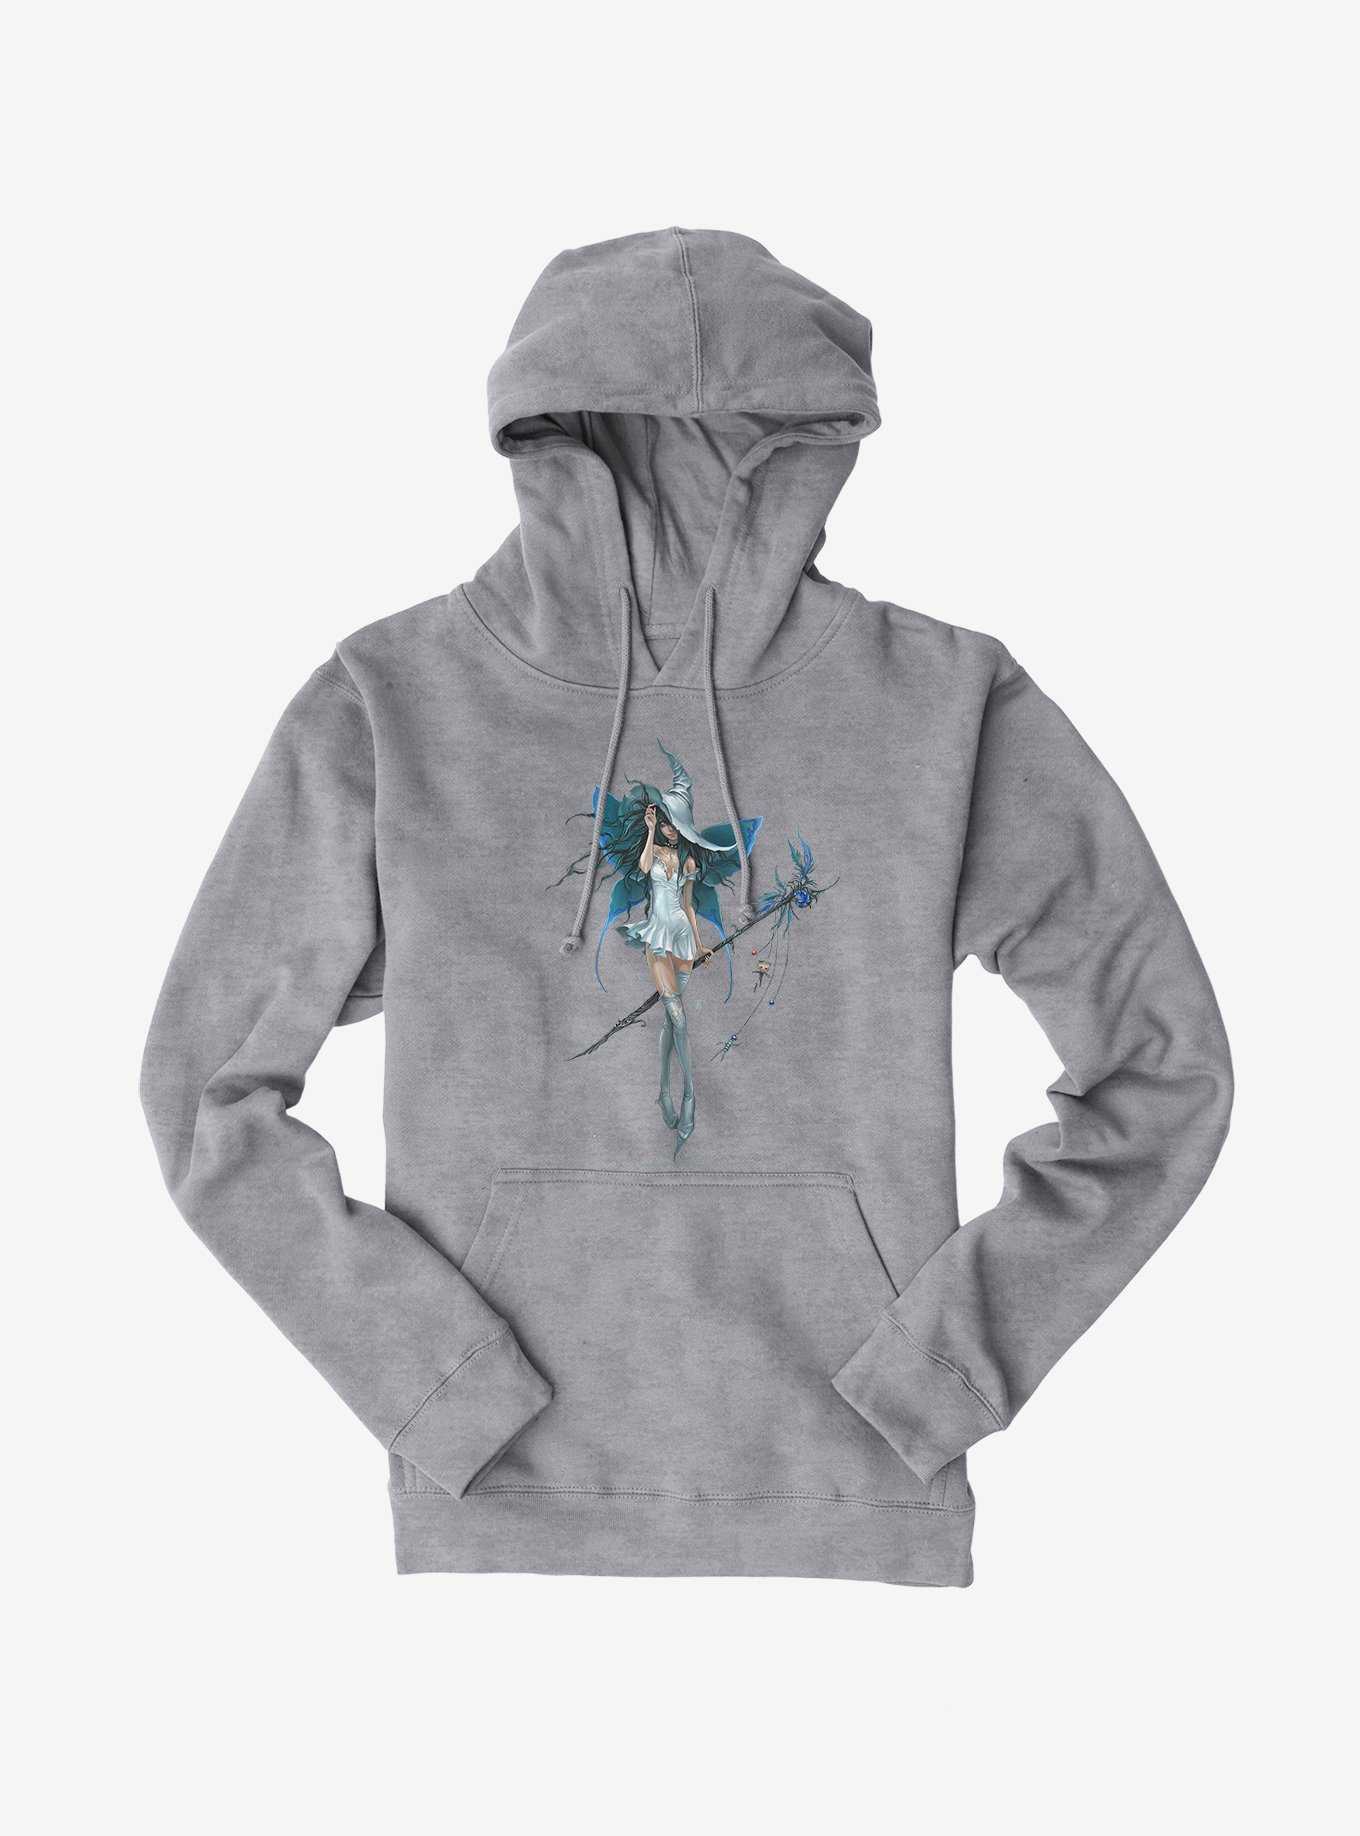 Fairies By Trick Witch Fairy Hoodie, HEATHER GREY, hi-res